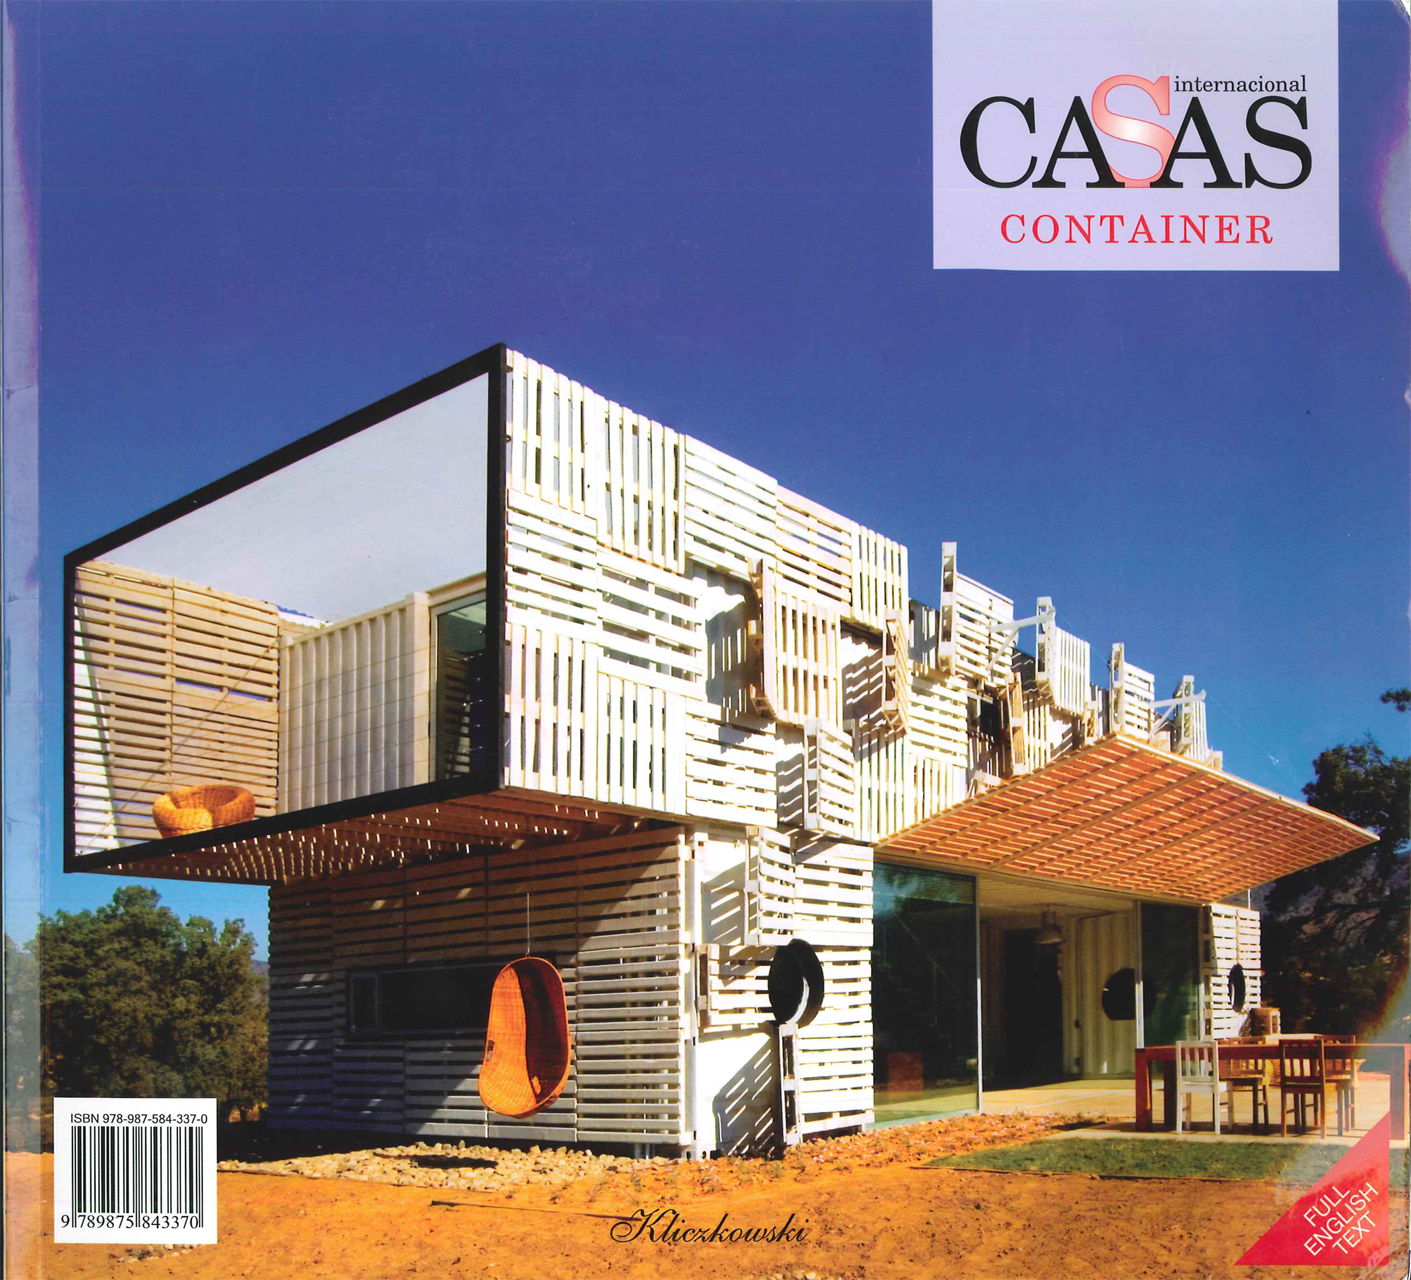 Casas Container - 2011 (p16)-1.png